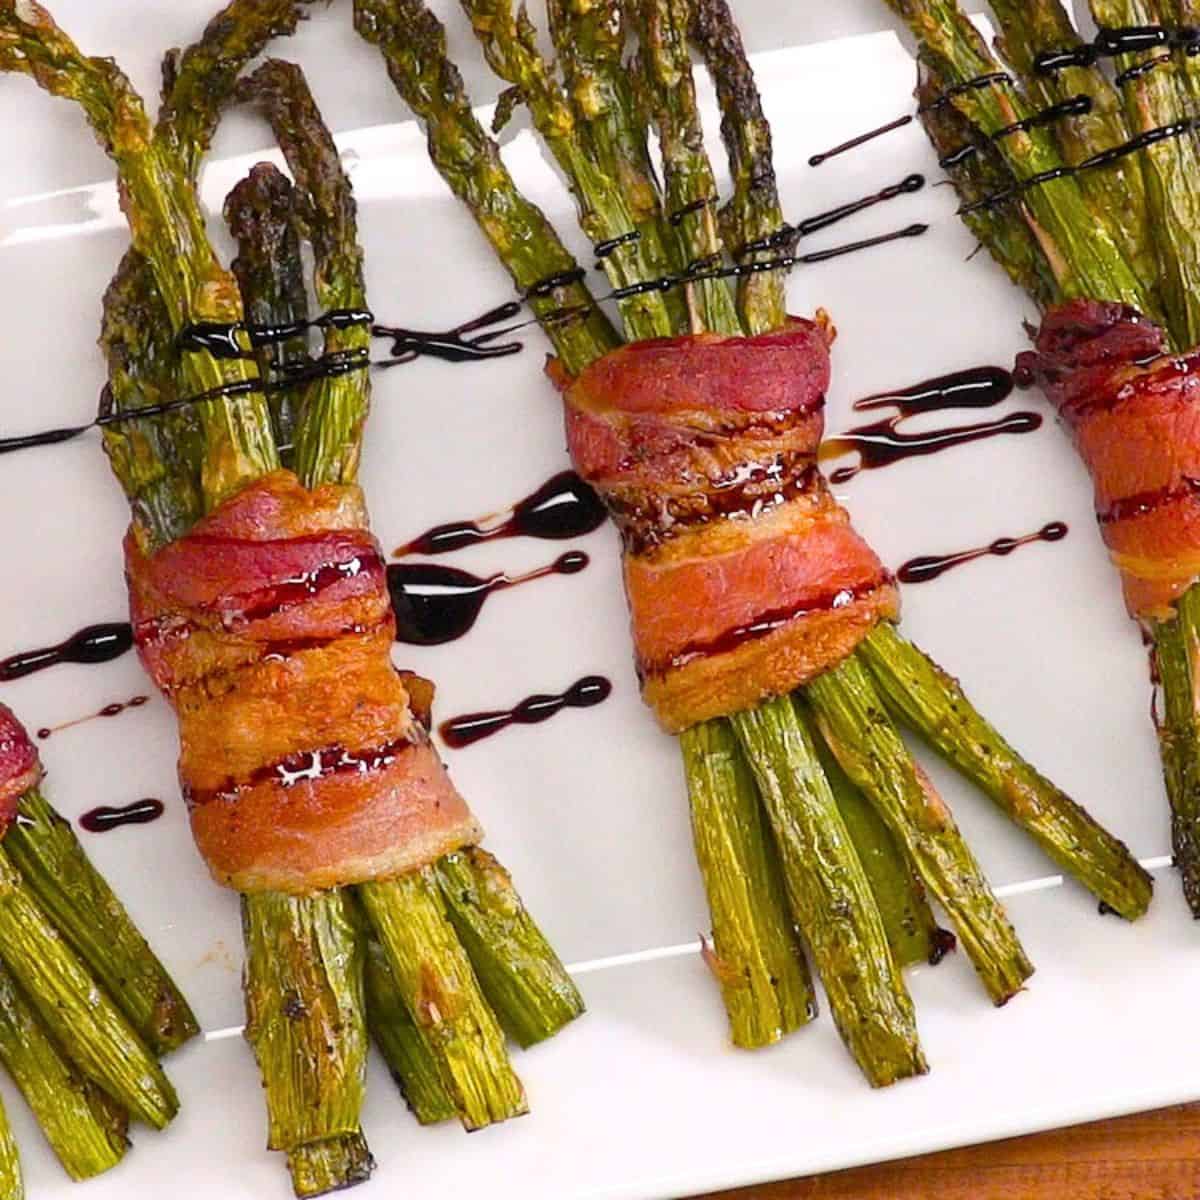 Bacon Wrapped Asparagus on platter with honey balsamic glaze.